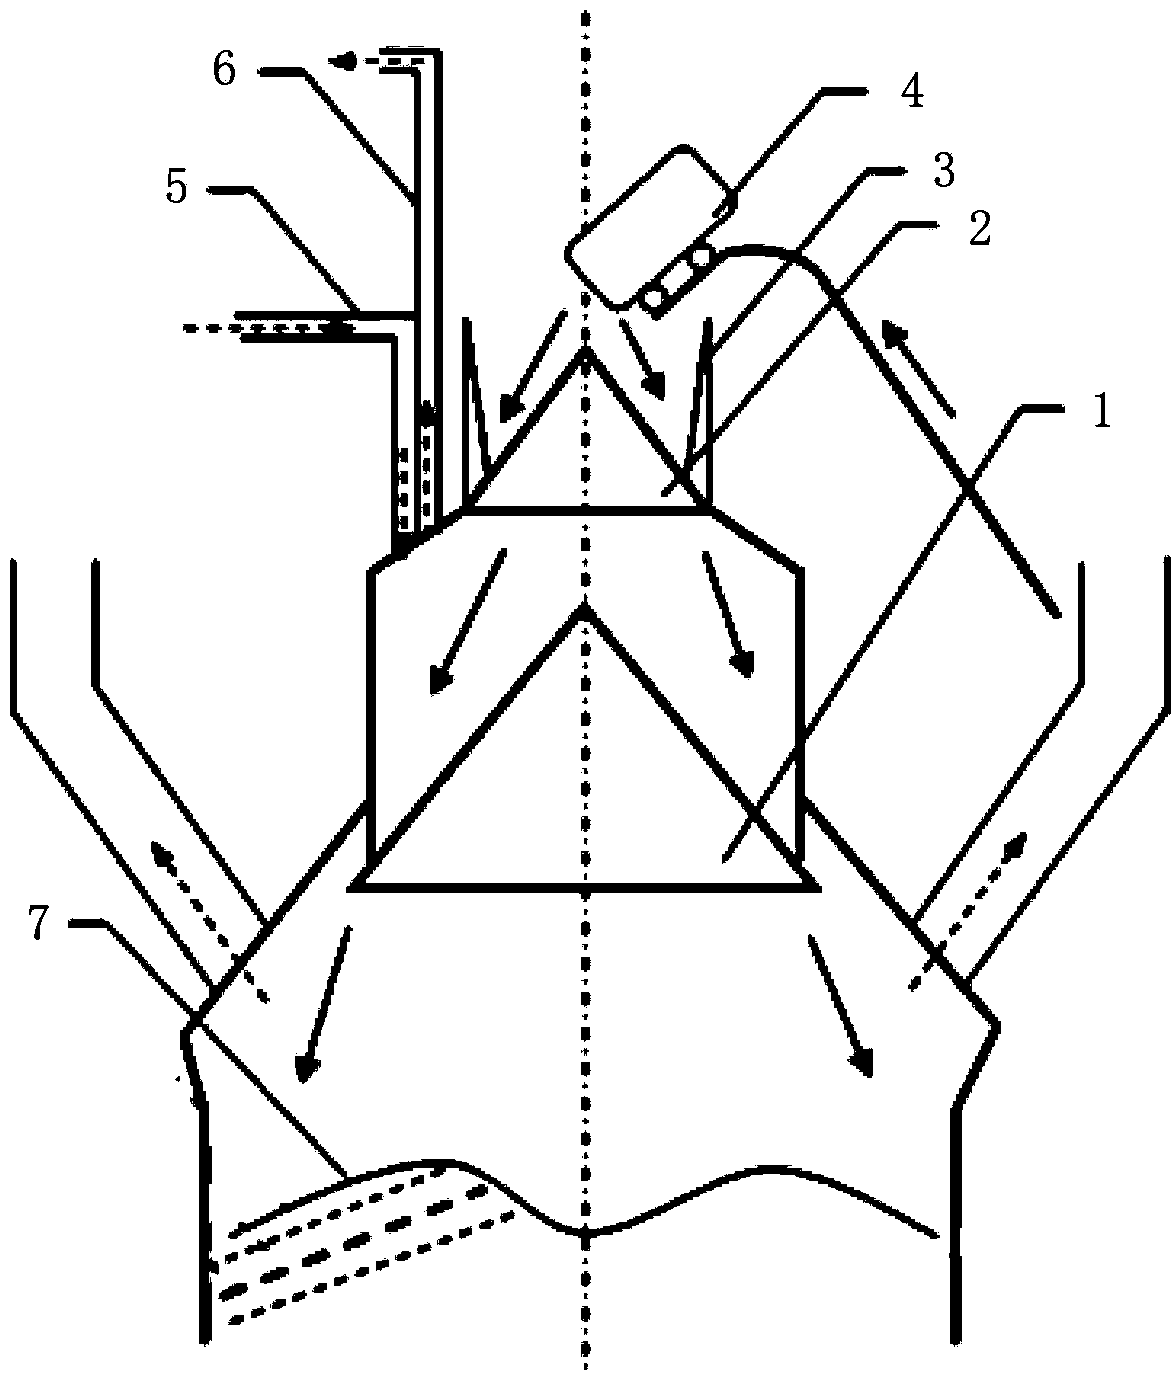 Bell type blast furnace smelting method by using small-size sinters